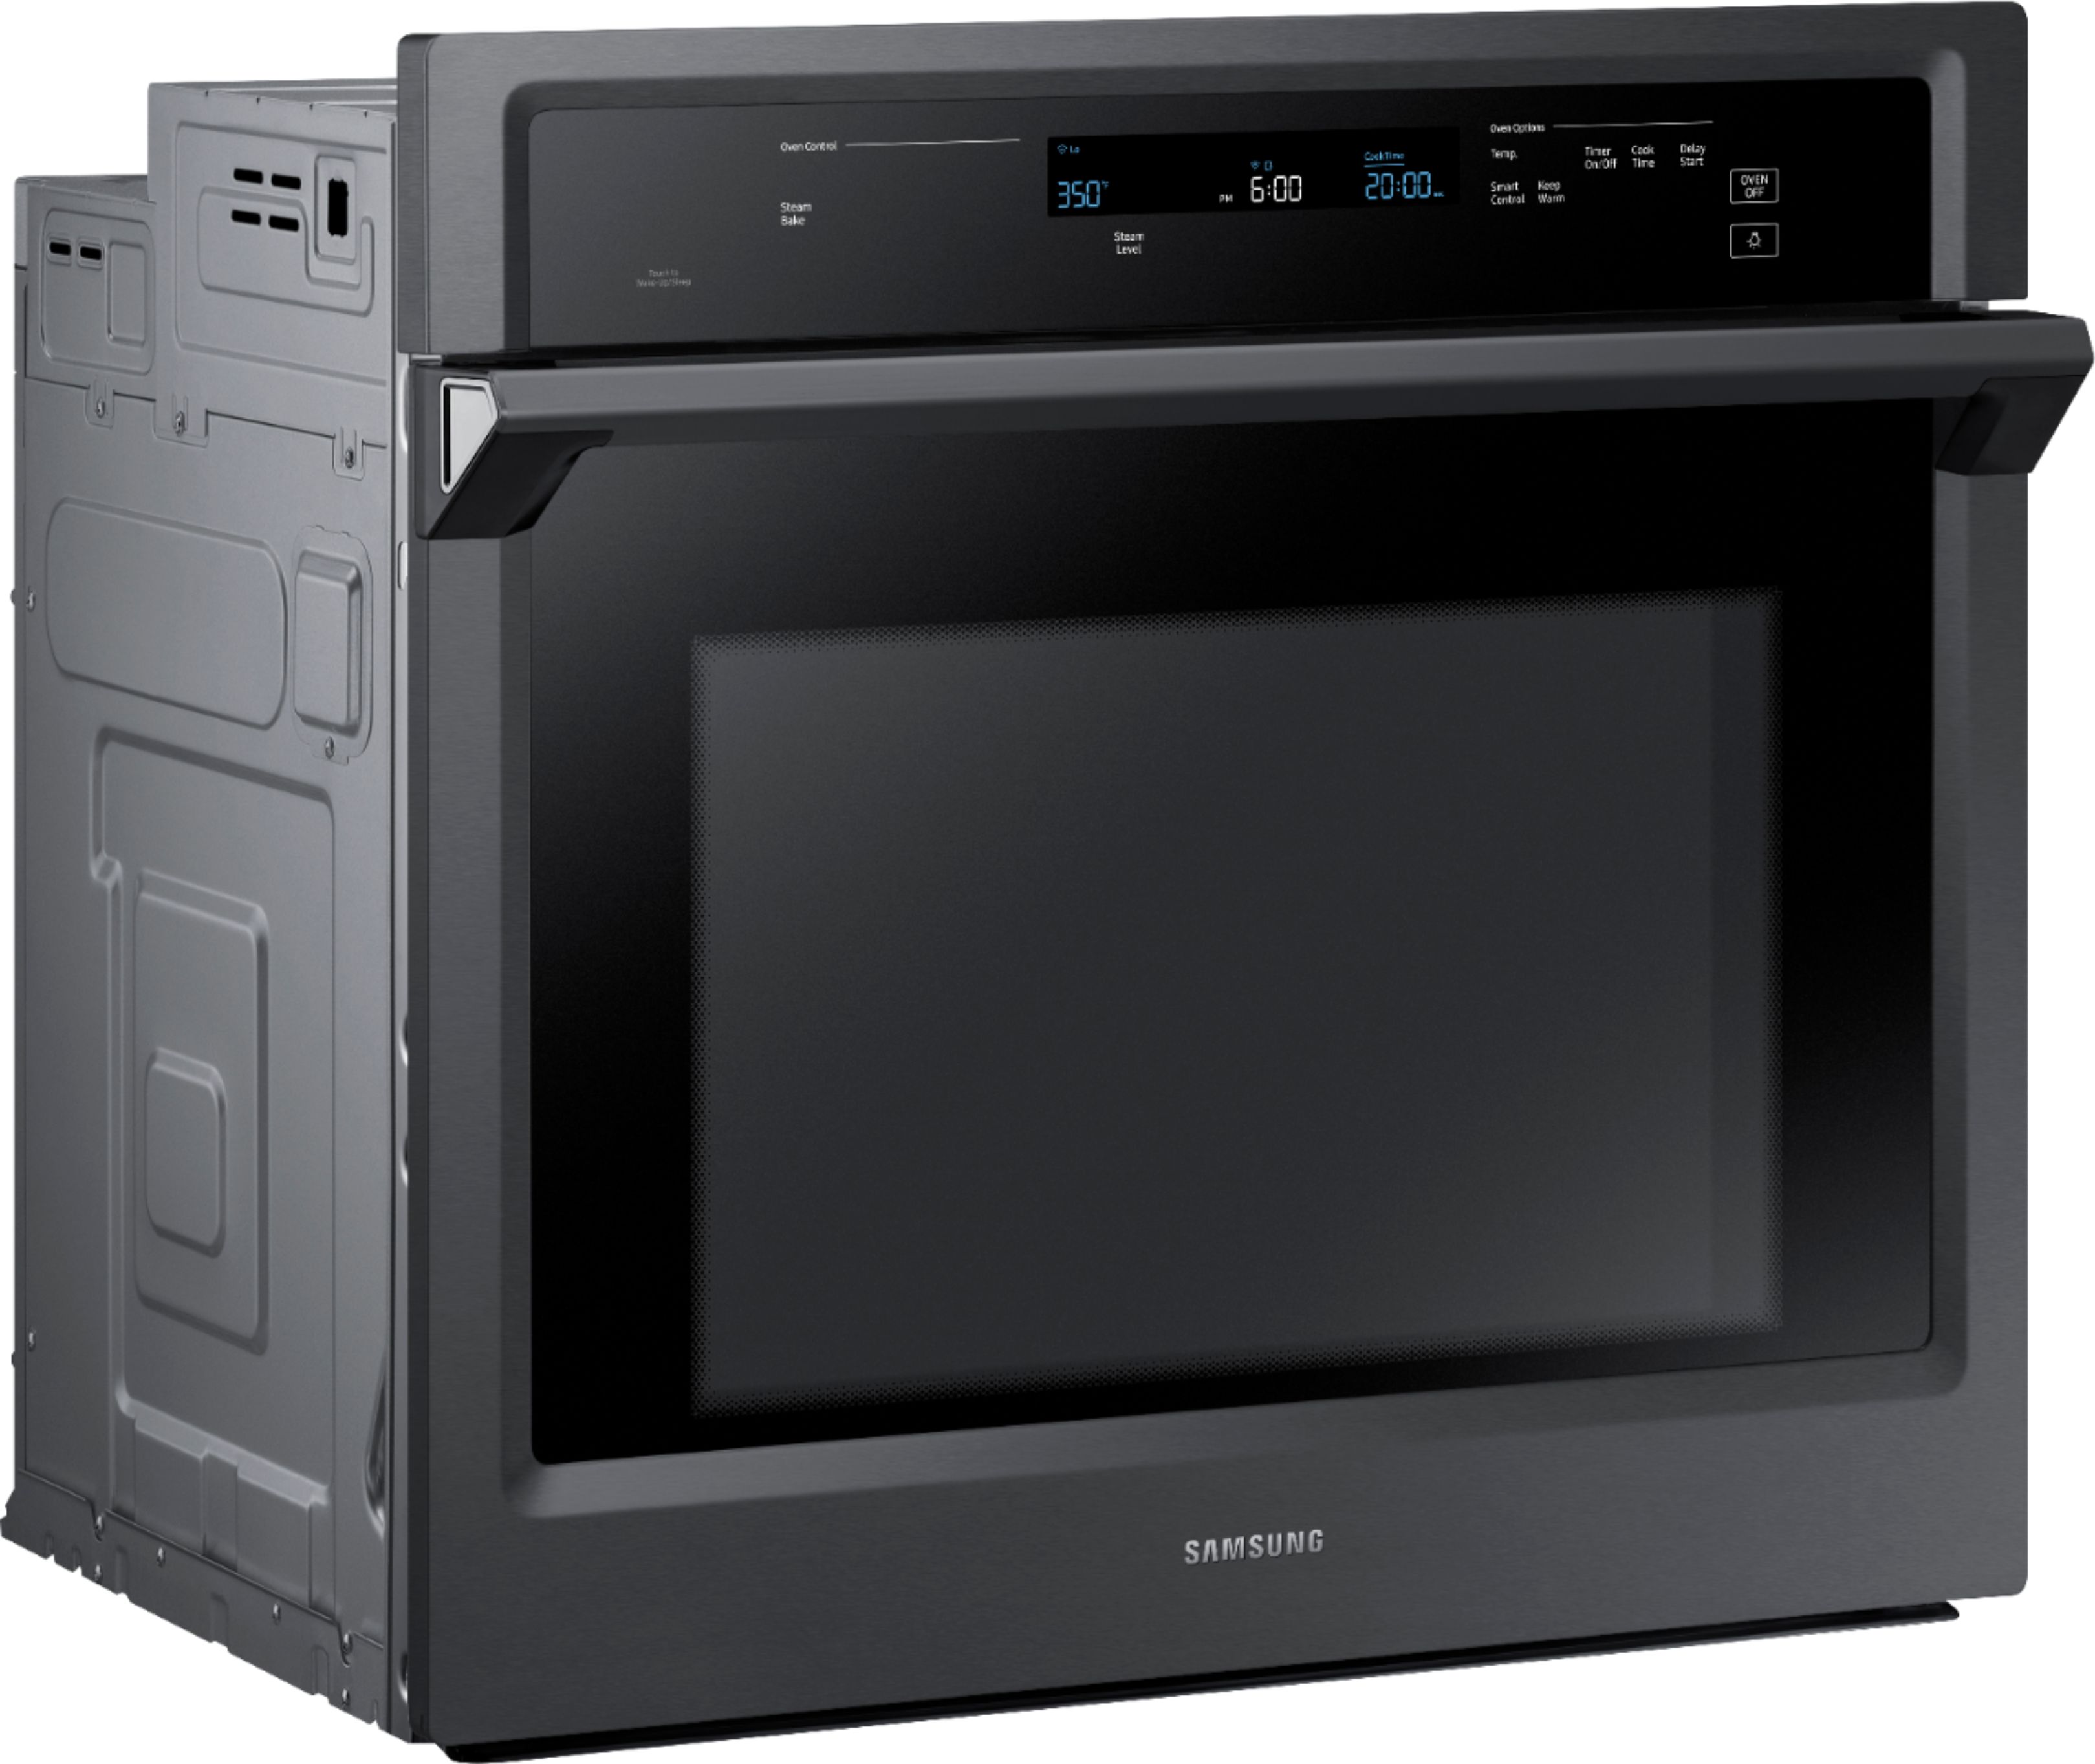 Angle View: Whirlpool - 24" Built-In Single Electric Wall Oven - Black